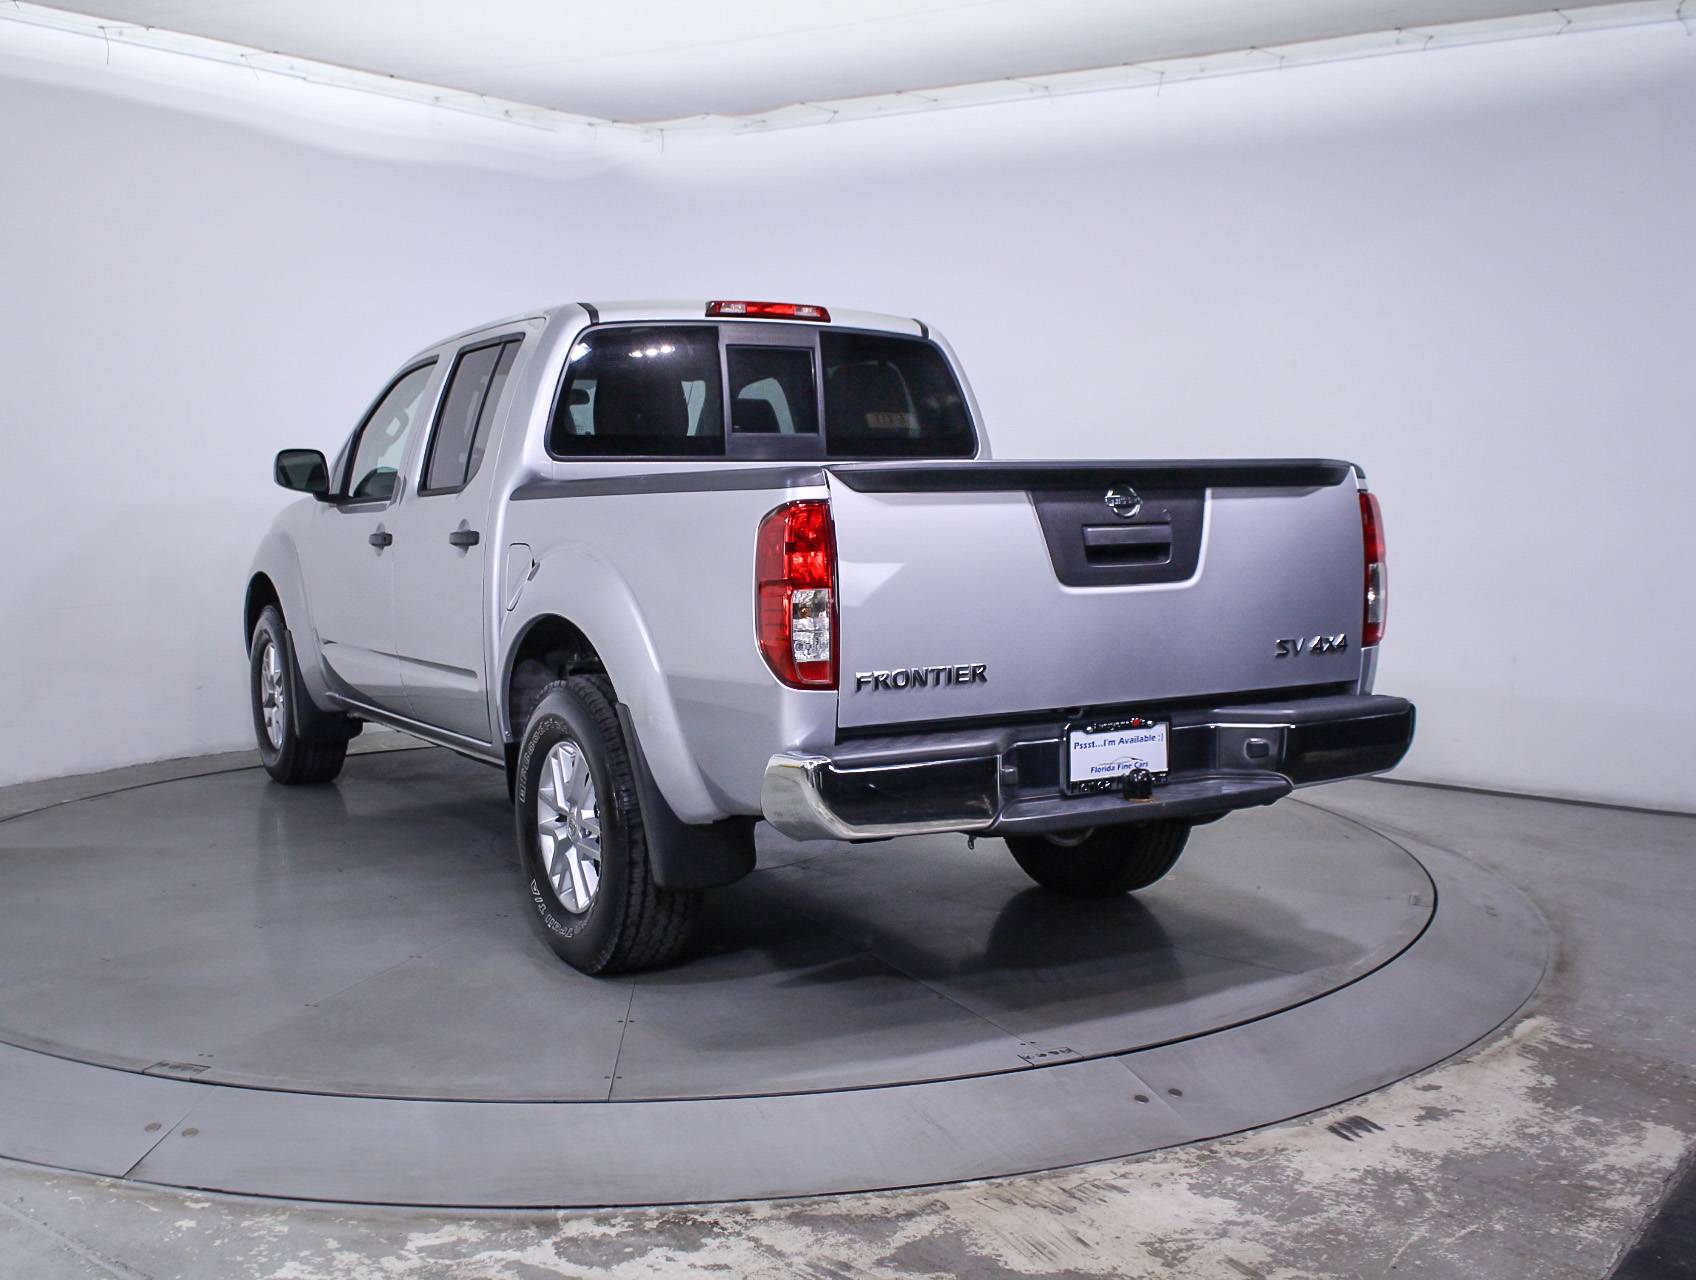 Florida Fine Cars - Used NISSAN FRONTIER 2015 MIAMI SV 4WD